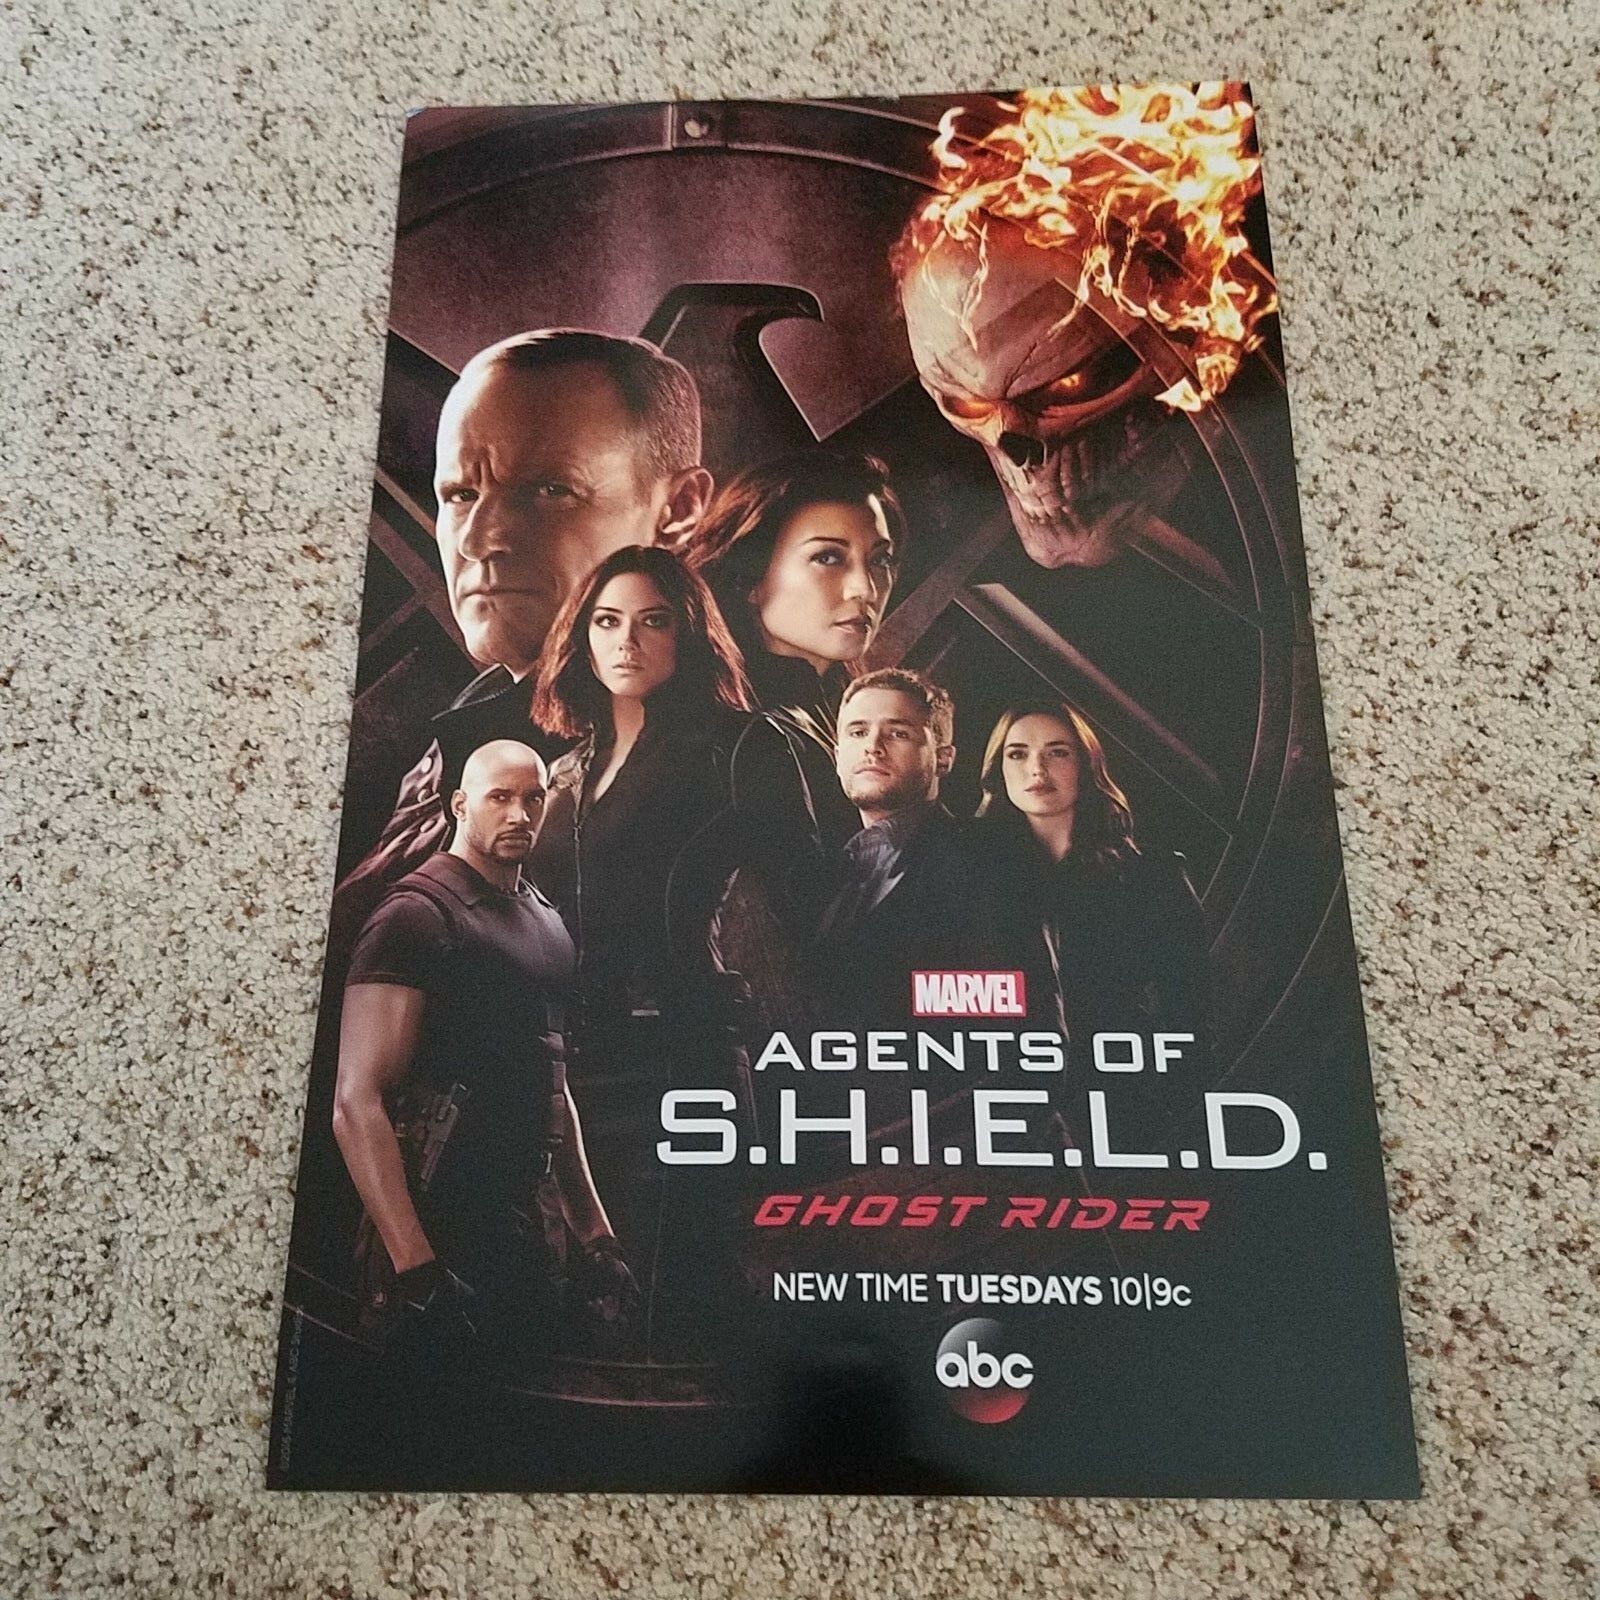 New York Comic Con 2016 - Nycc 2016 - Agents Of Shield - Ghost Rider Poster